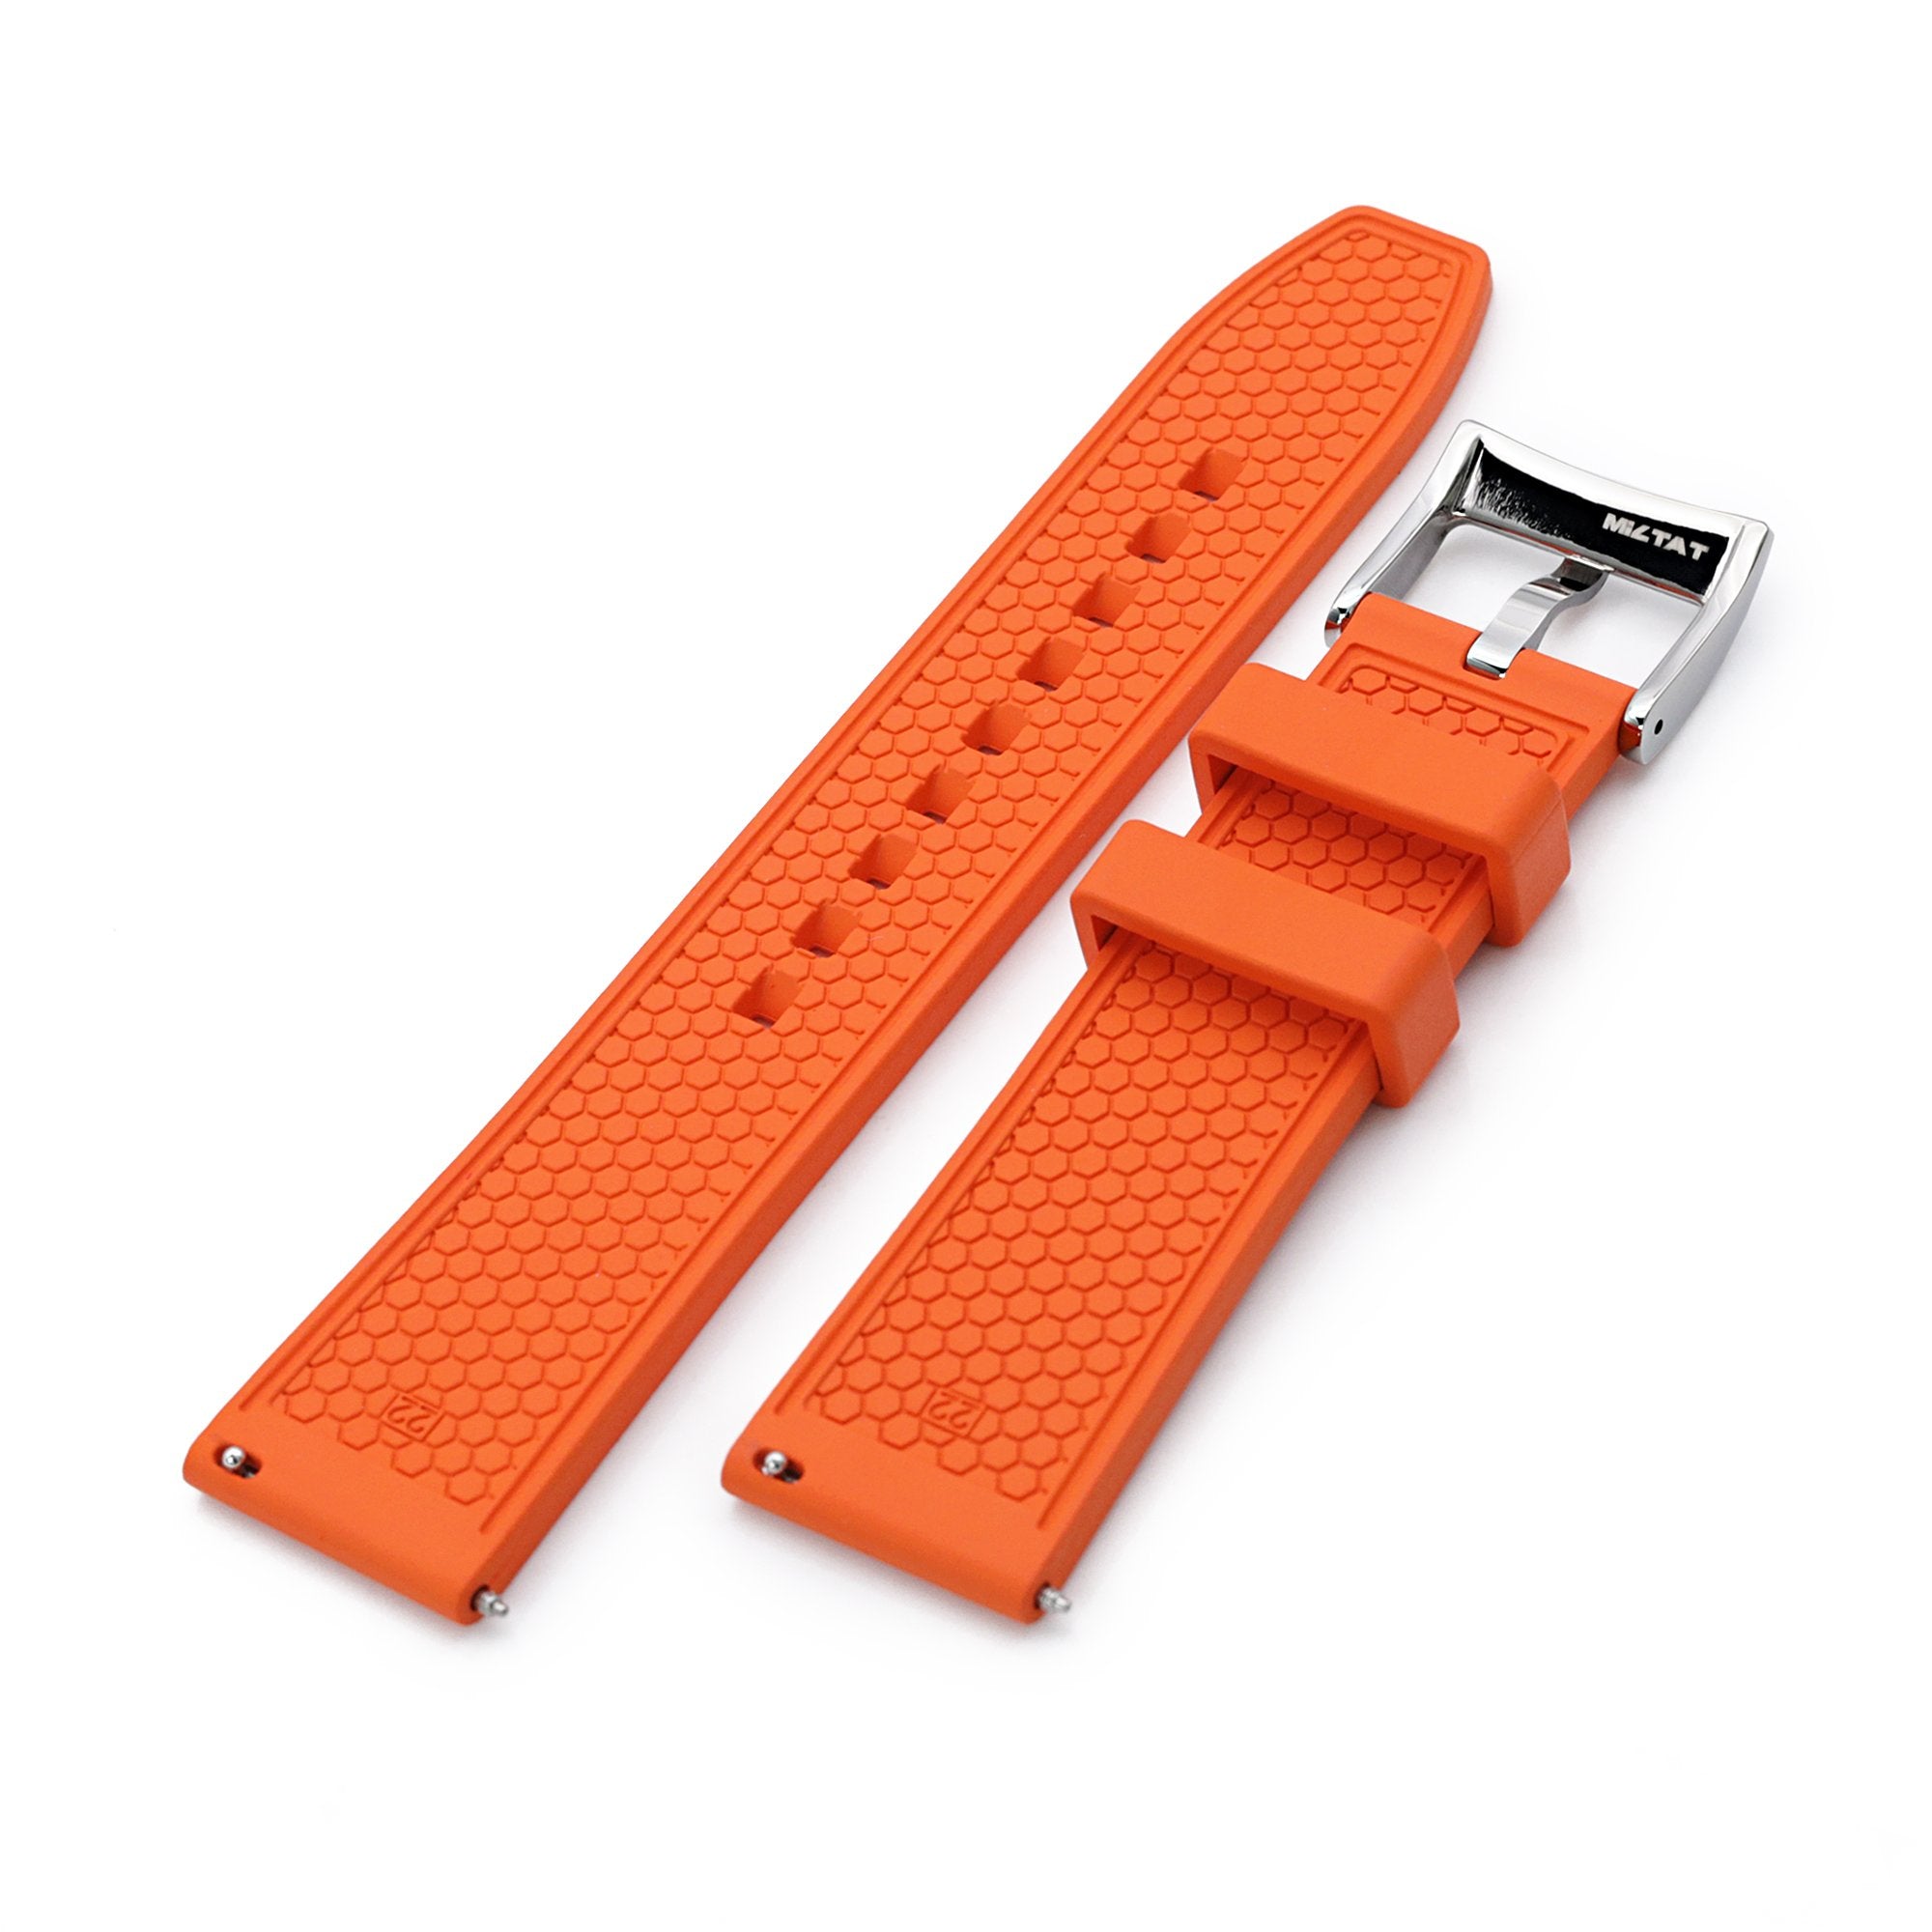 HONEY Orange FKM Quick Release Rubber Strap, 20mm or 22mm Strapcode Watch Band